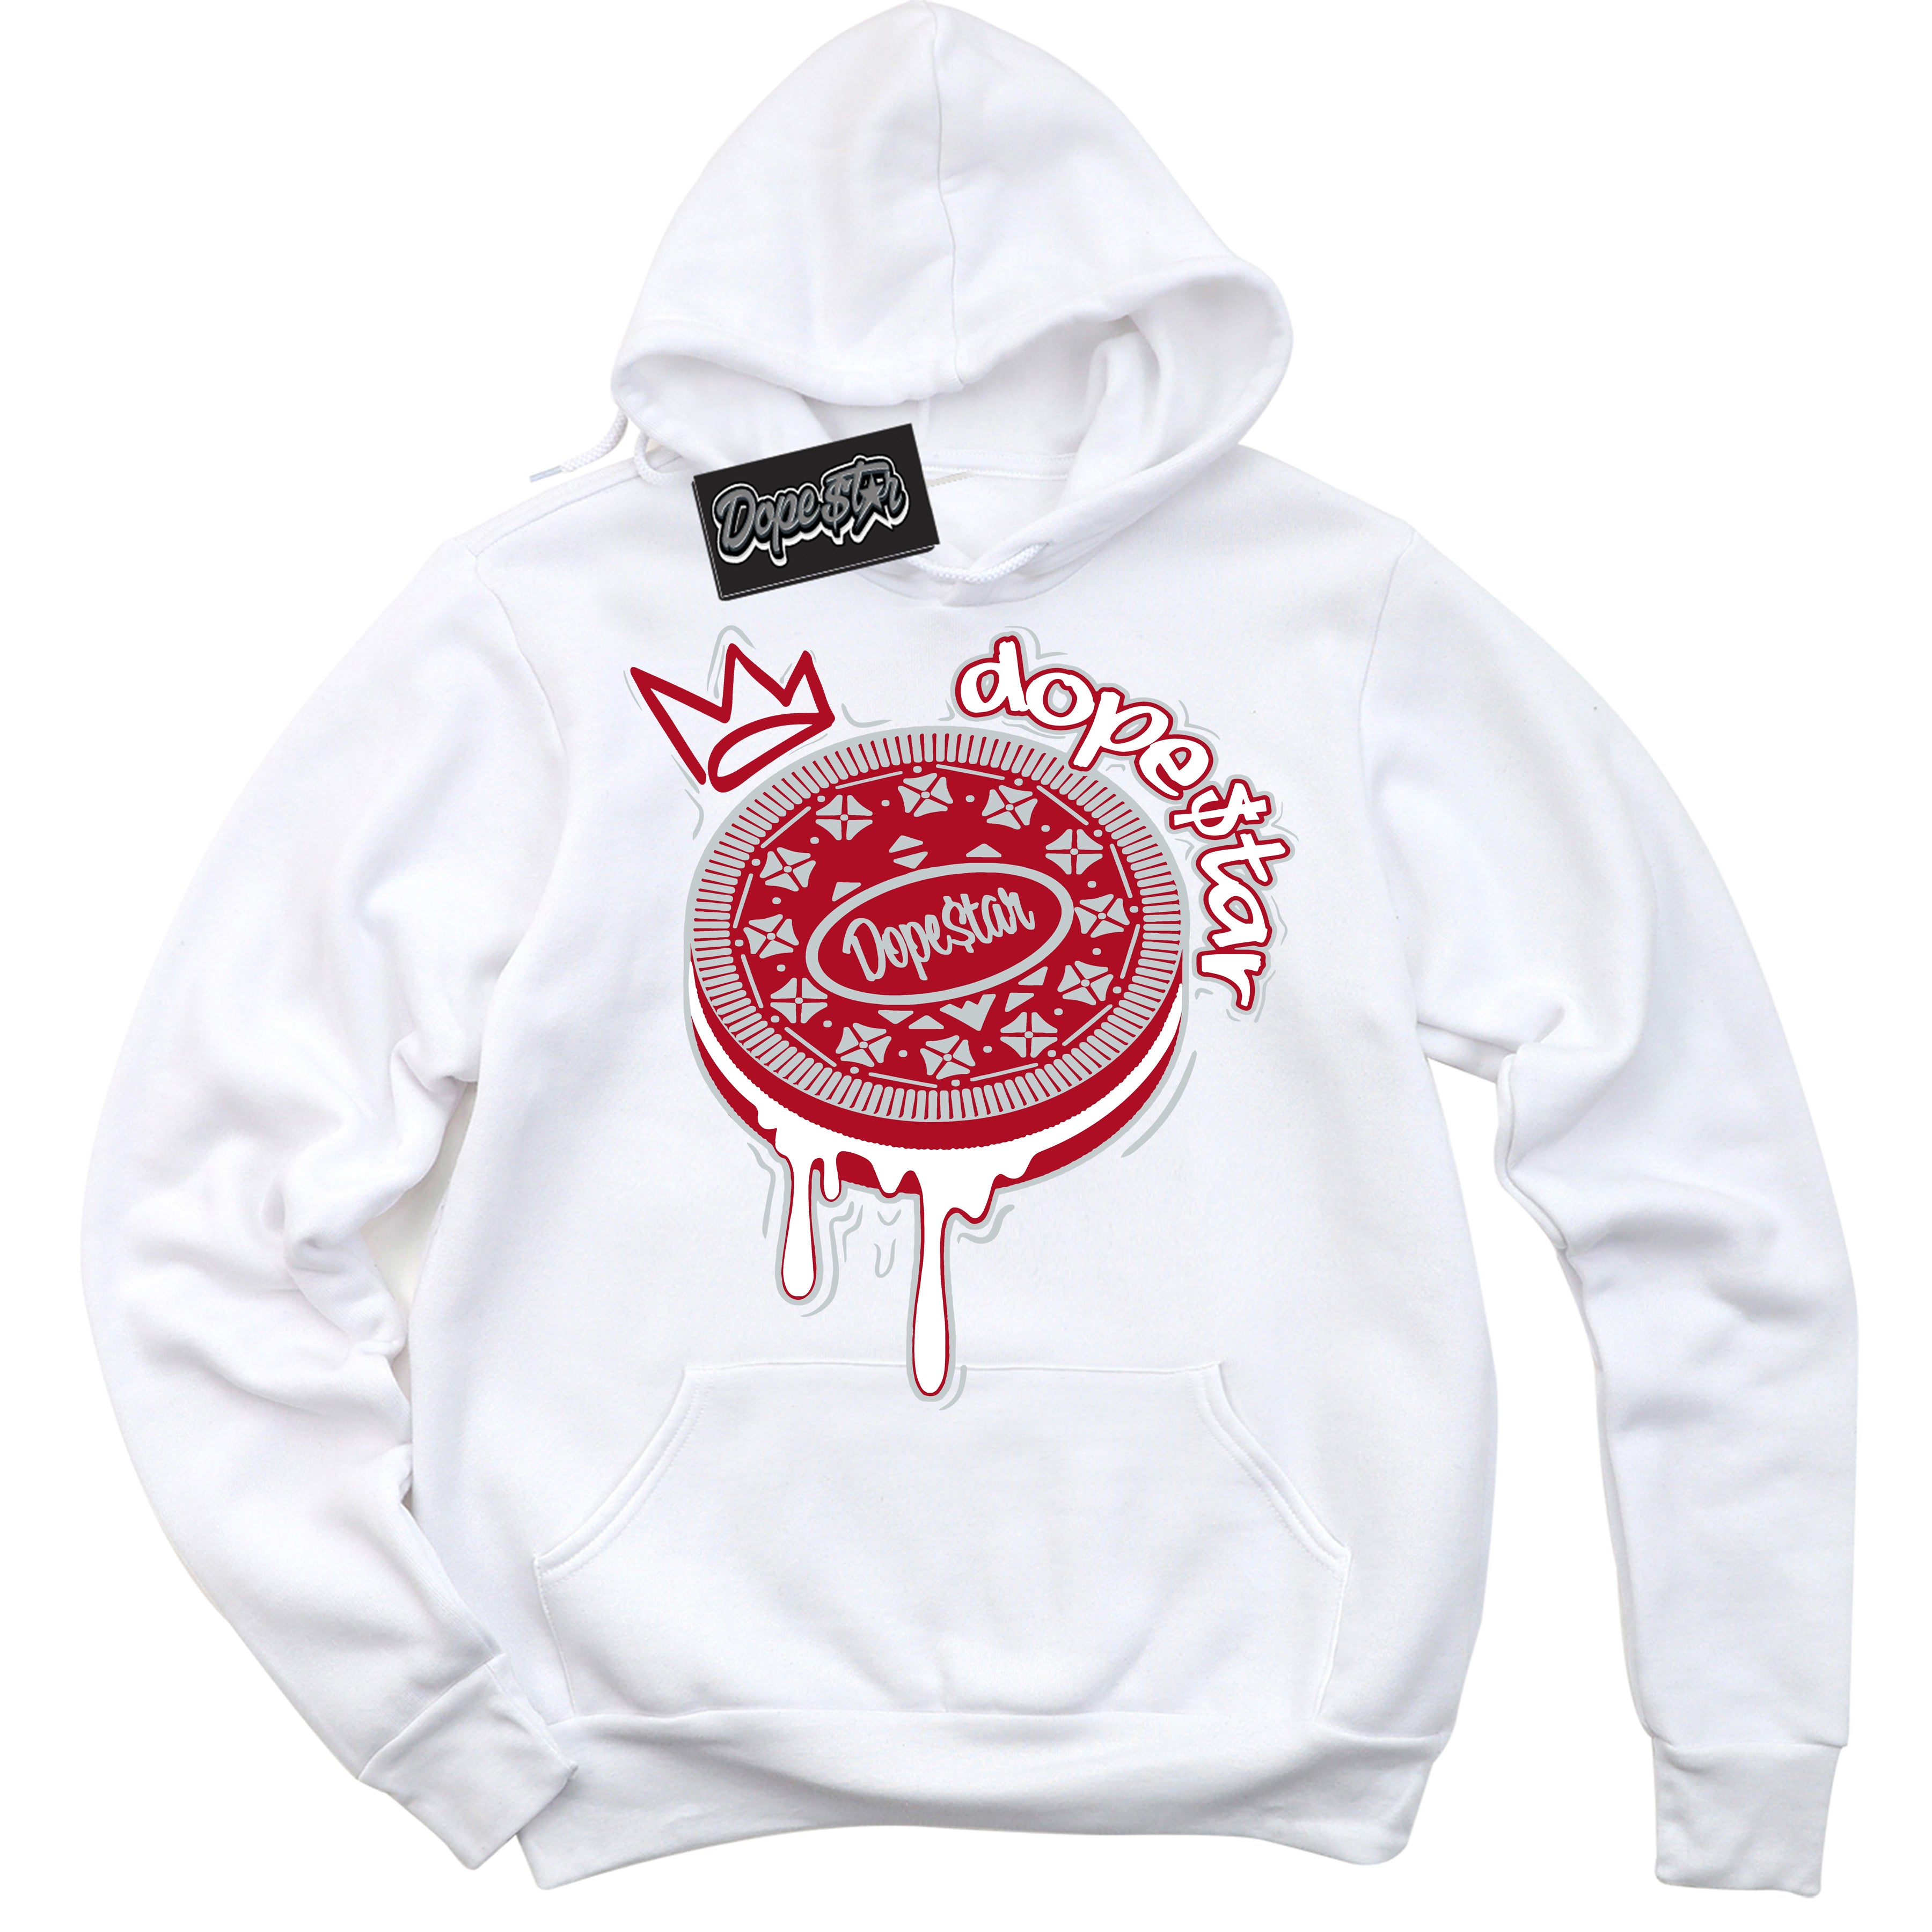 Cool White Hoodie with “ Oreo DS ”  design that Perfectly Matches  Reverse Ultraman Sneakers.